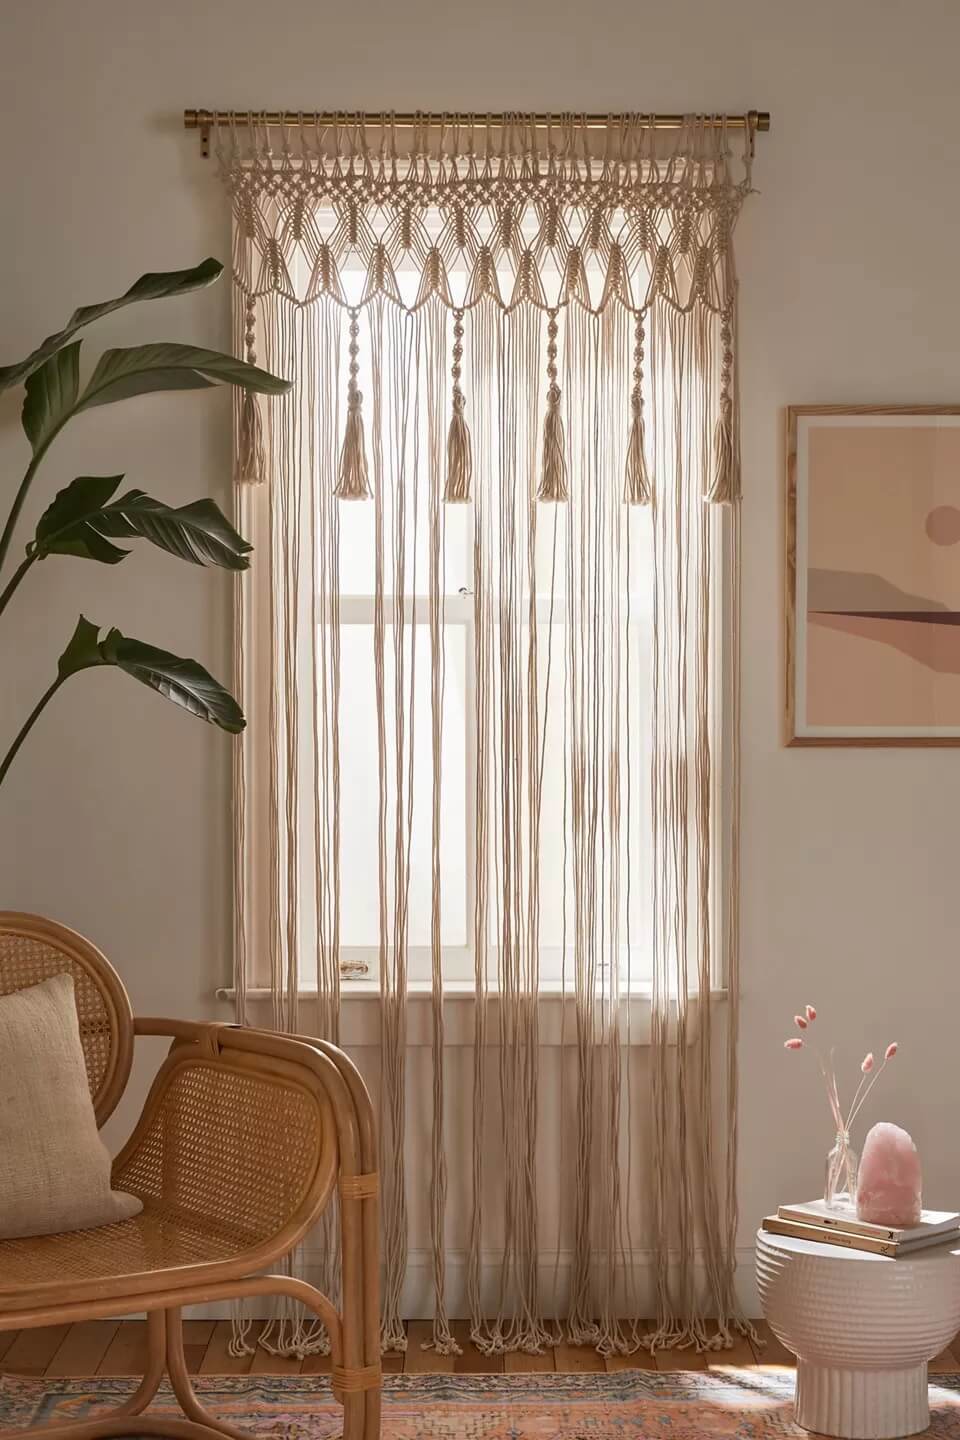 21 beautiful curtain ideas to brighten up your living space - 135